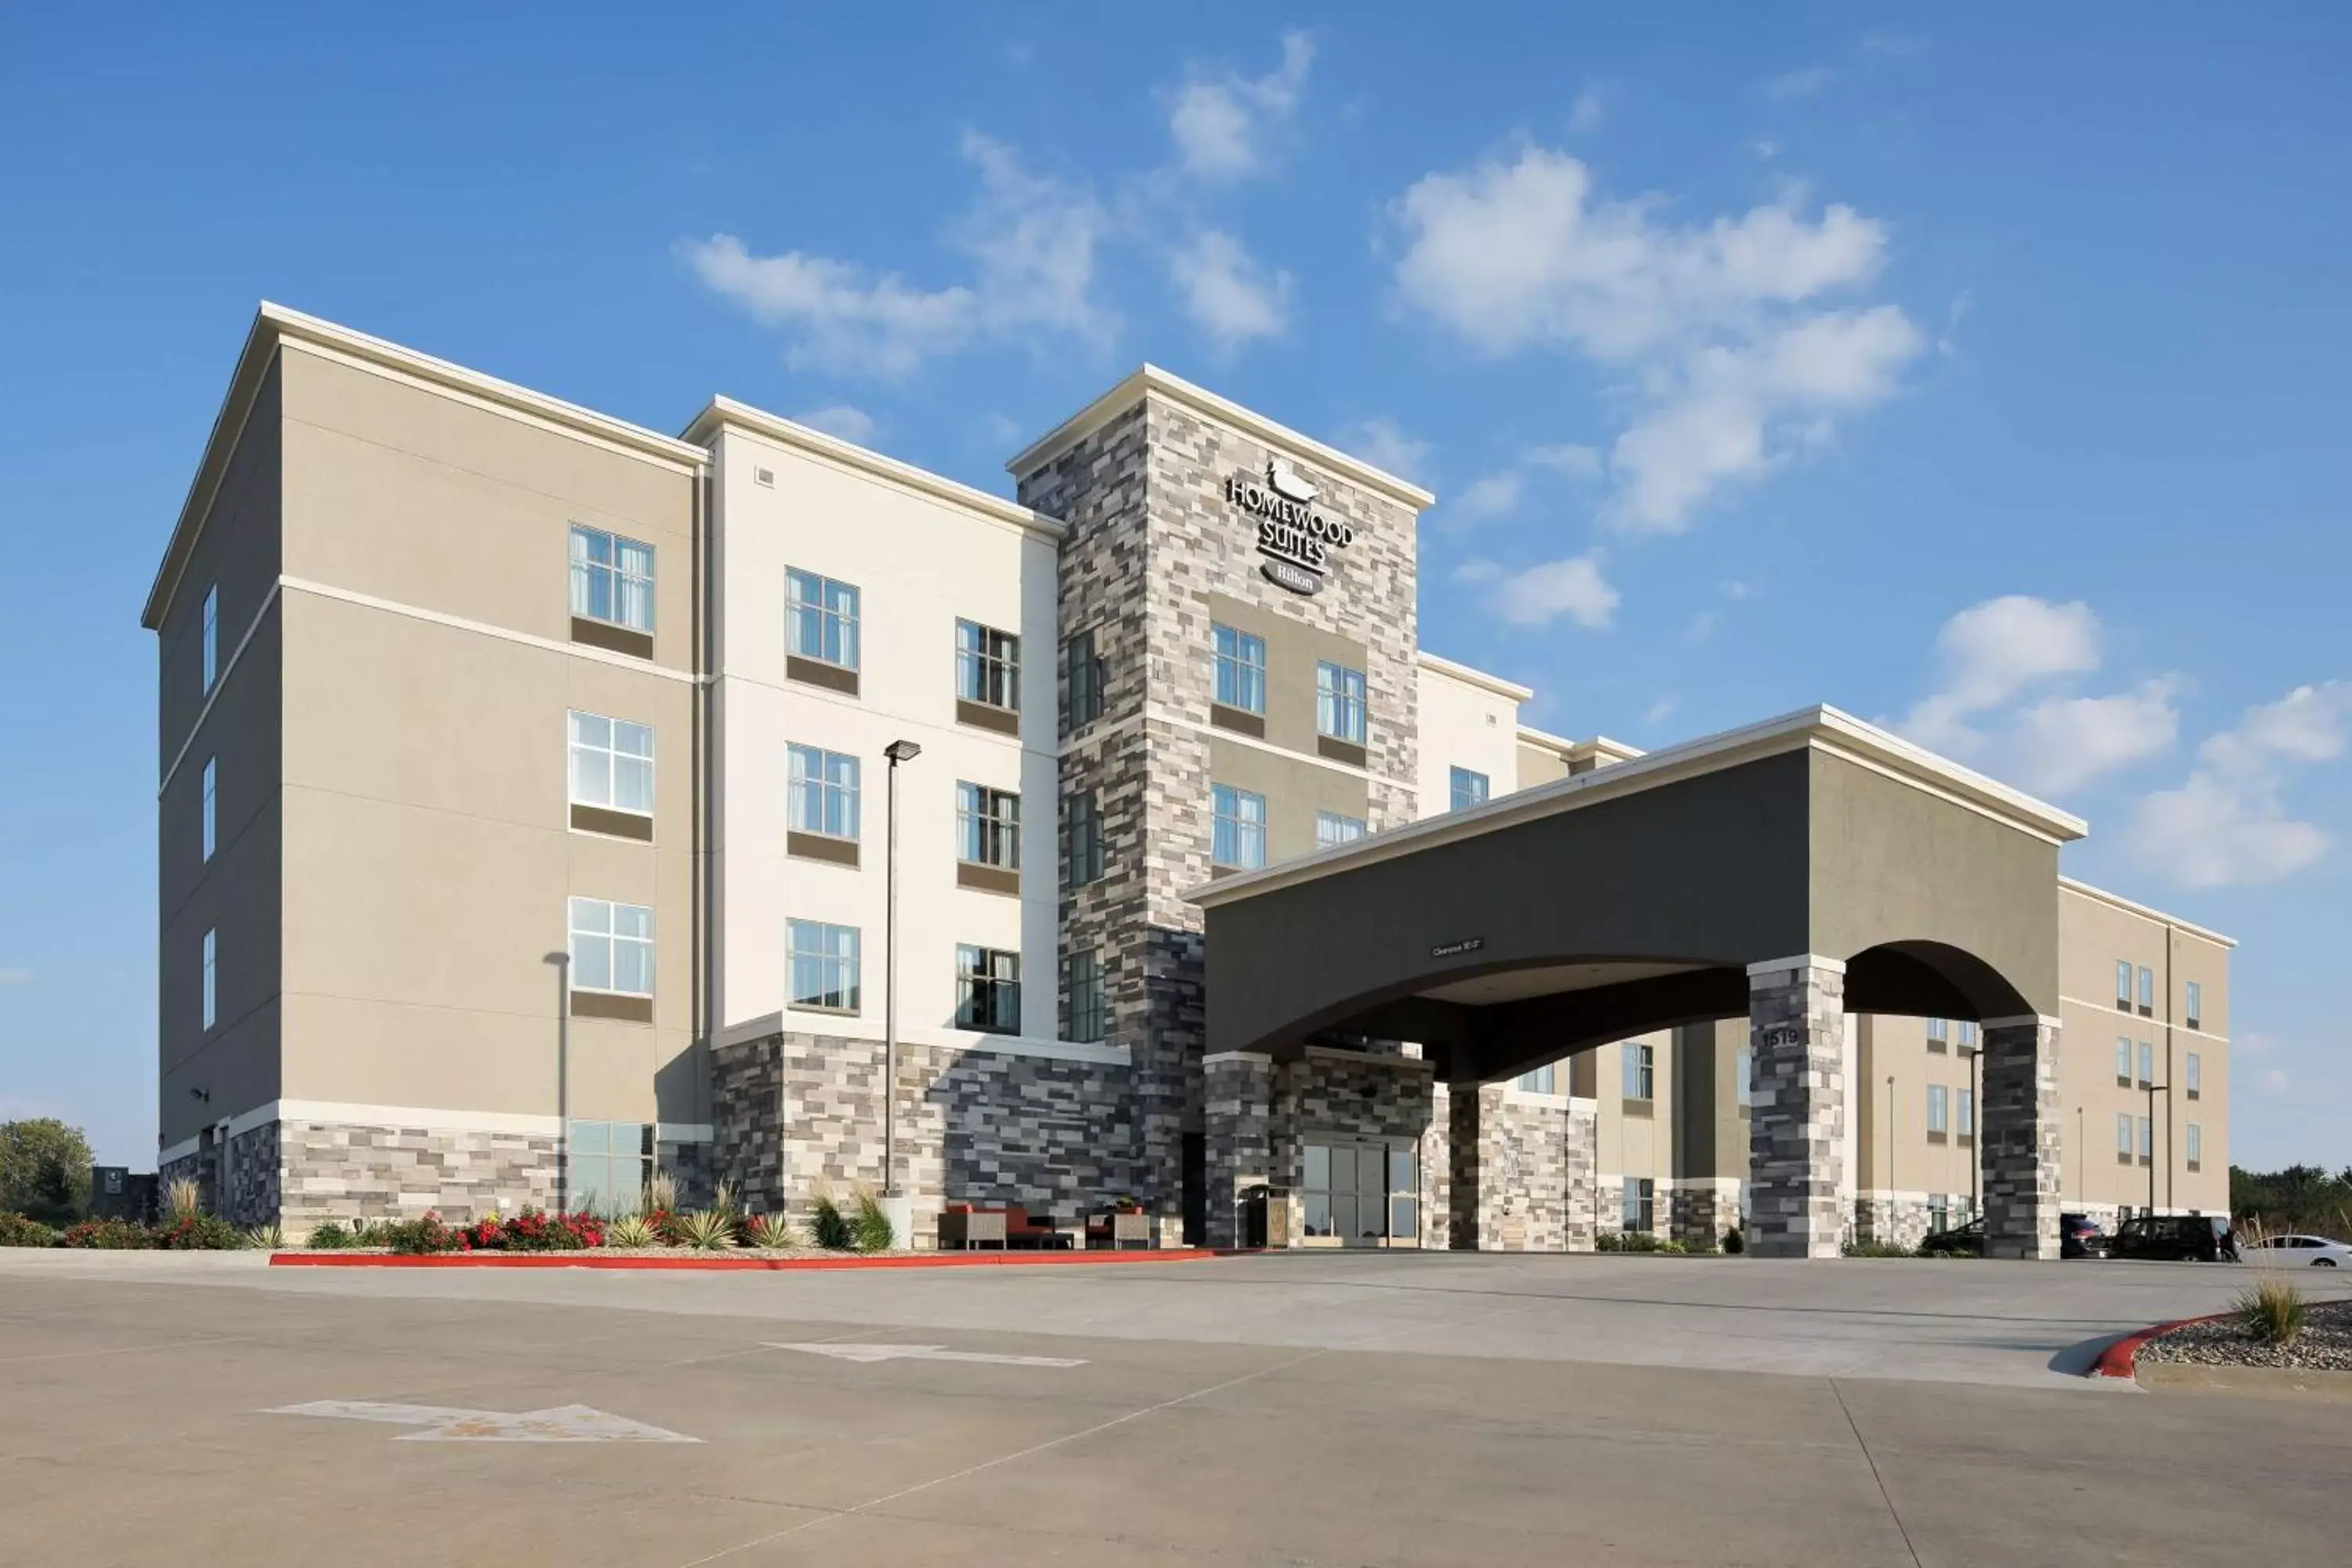 Property Building in Homewood Suites By Hilton Topeka